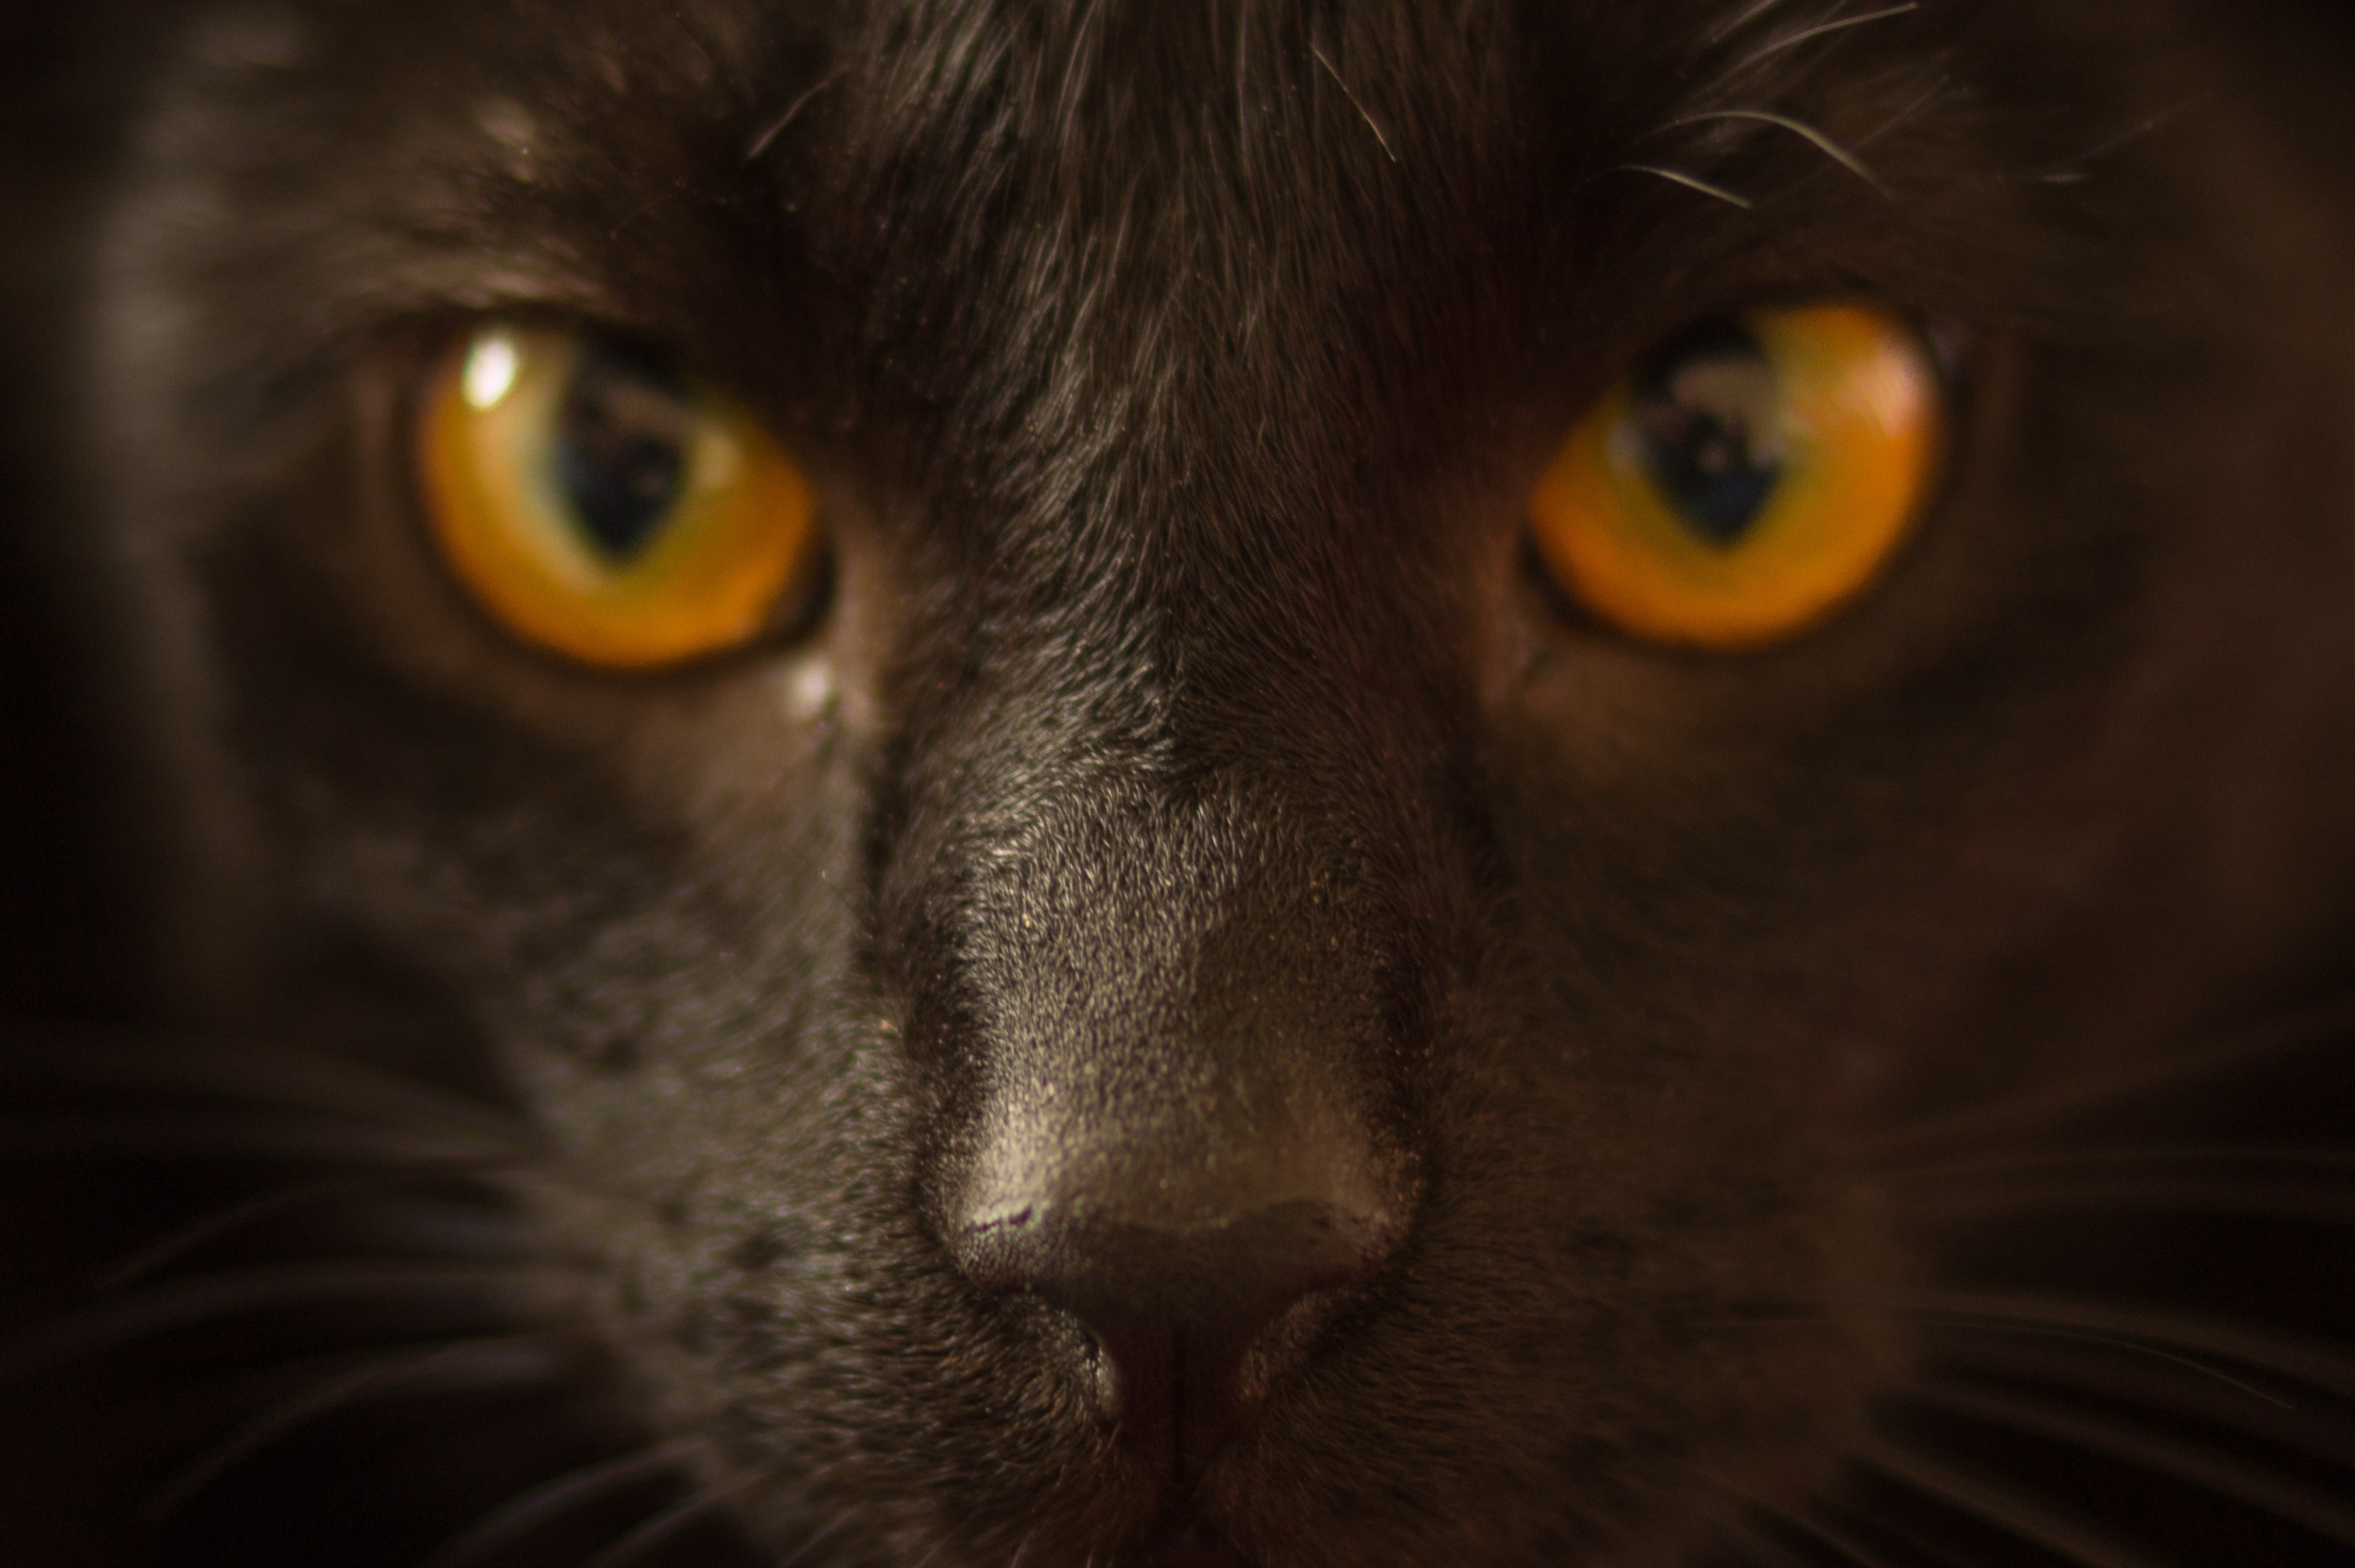 Portrait of black cat with yellow eyes